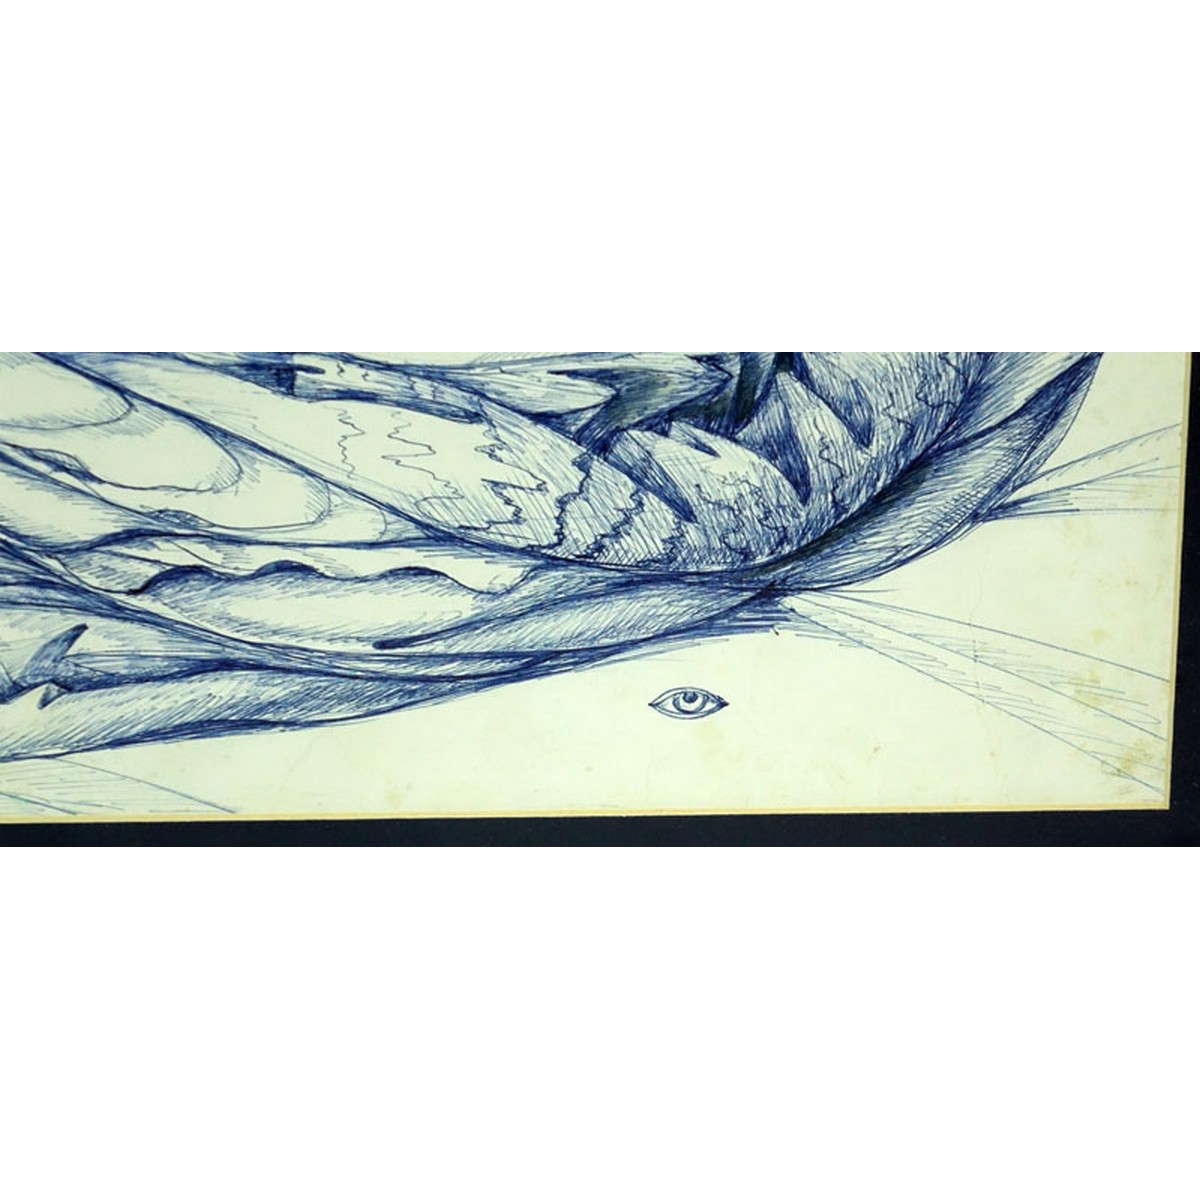 Modern Abstract Pen Drawing on Paper, Possibly Artist Signed Lower Right. Spotting and creasing to paper.